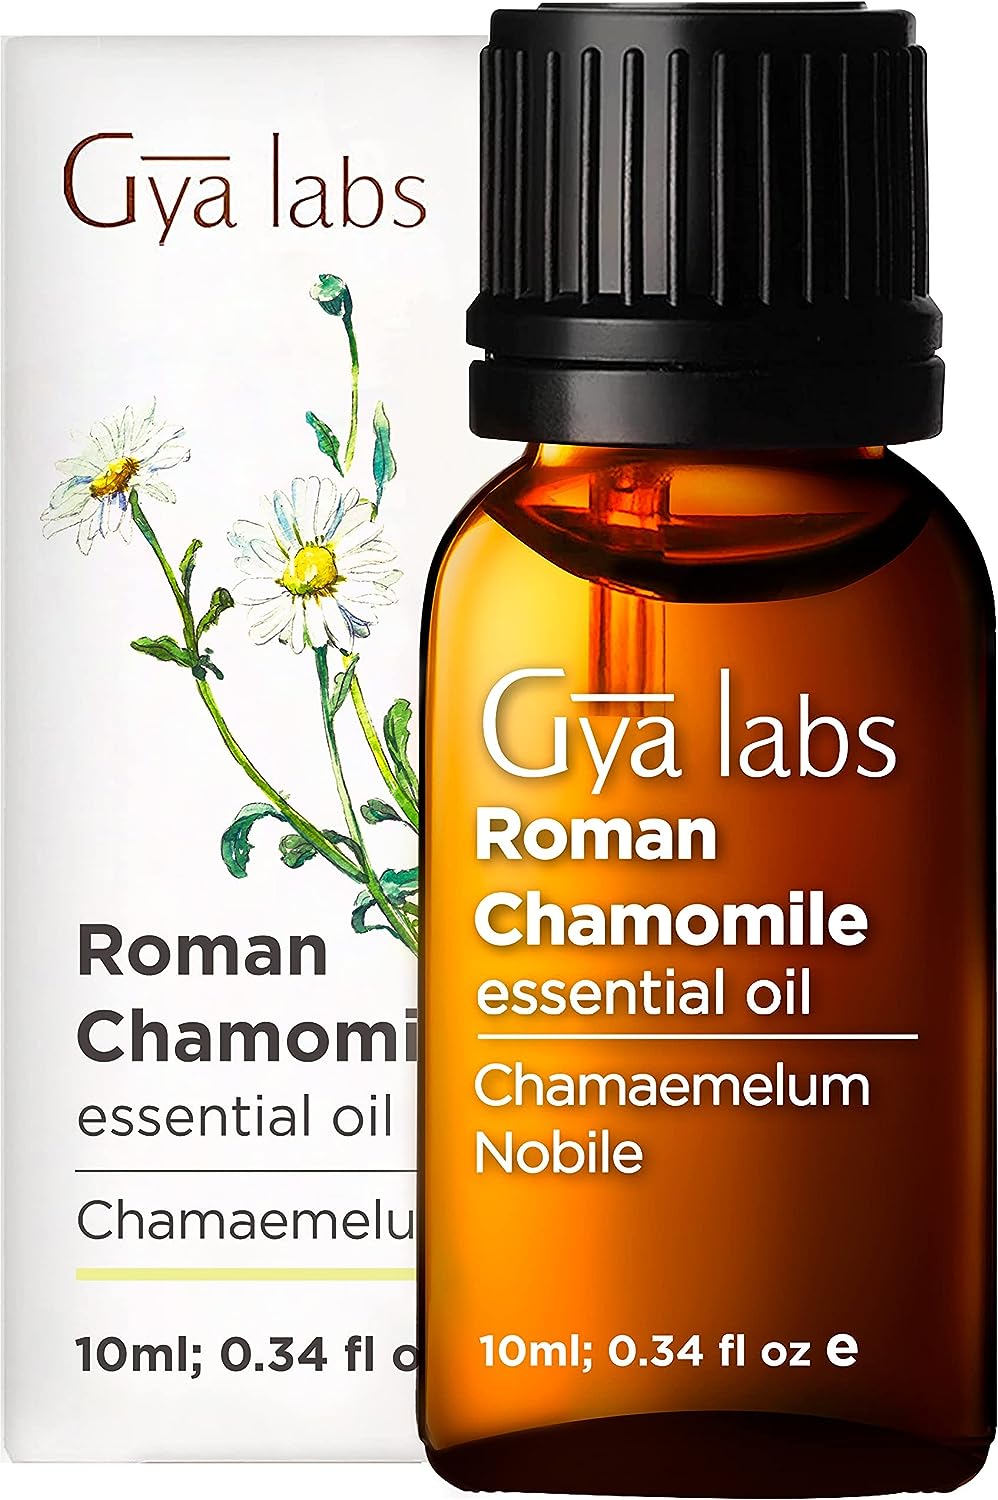 Gya Labs Roman Chamomile Essential Oil for Diffuser (10ml) - 100% Therapeutic Grade Essential Oils - Undiluted Chamomile Oil for Skin & Hair